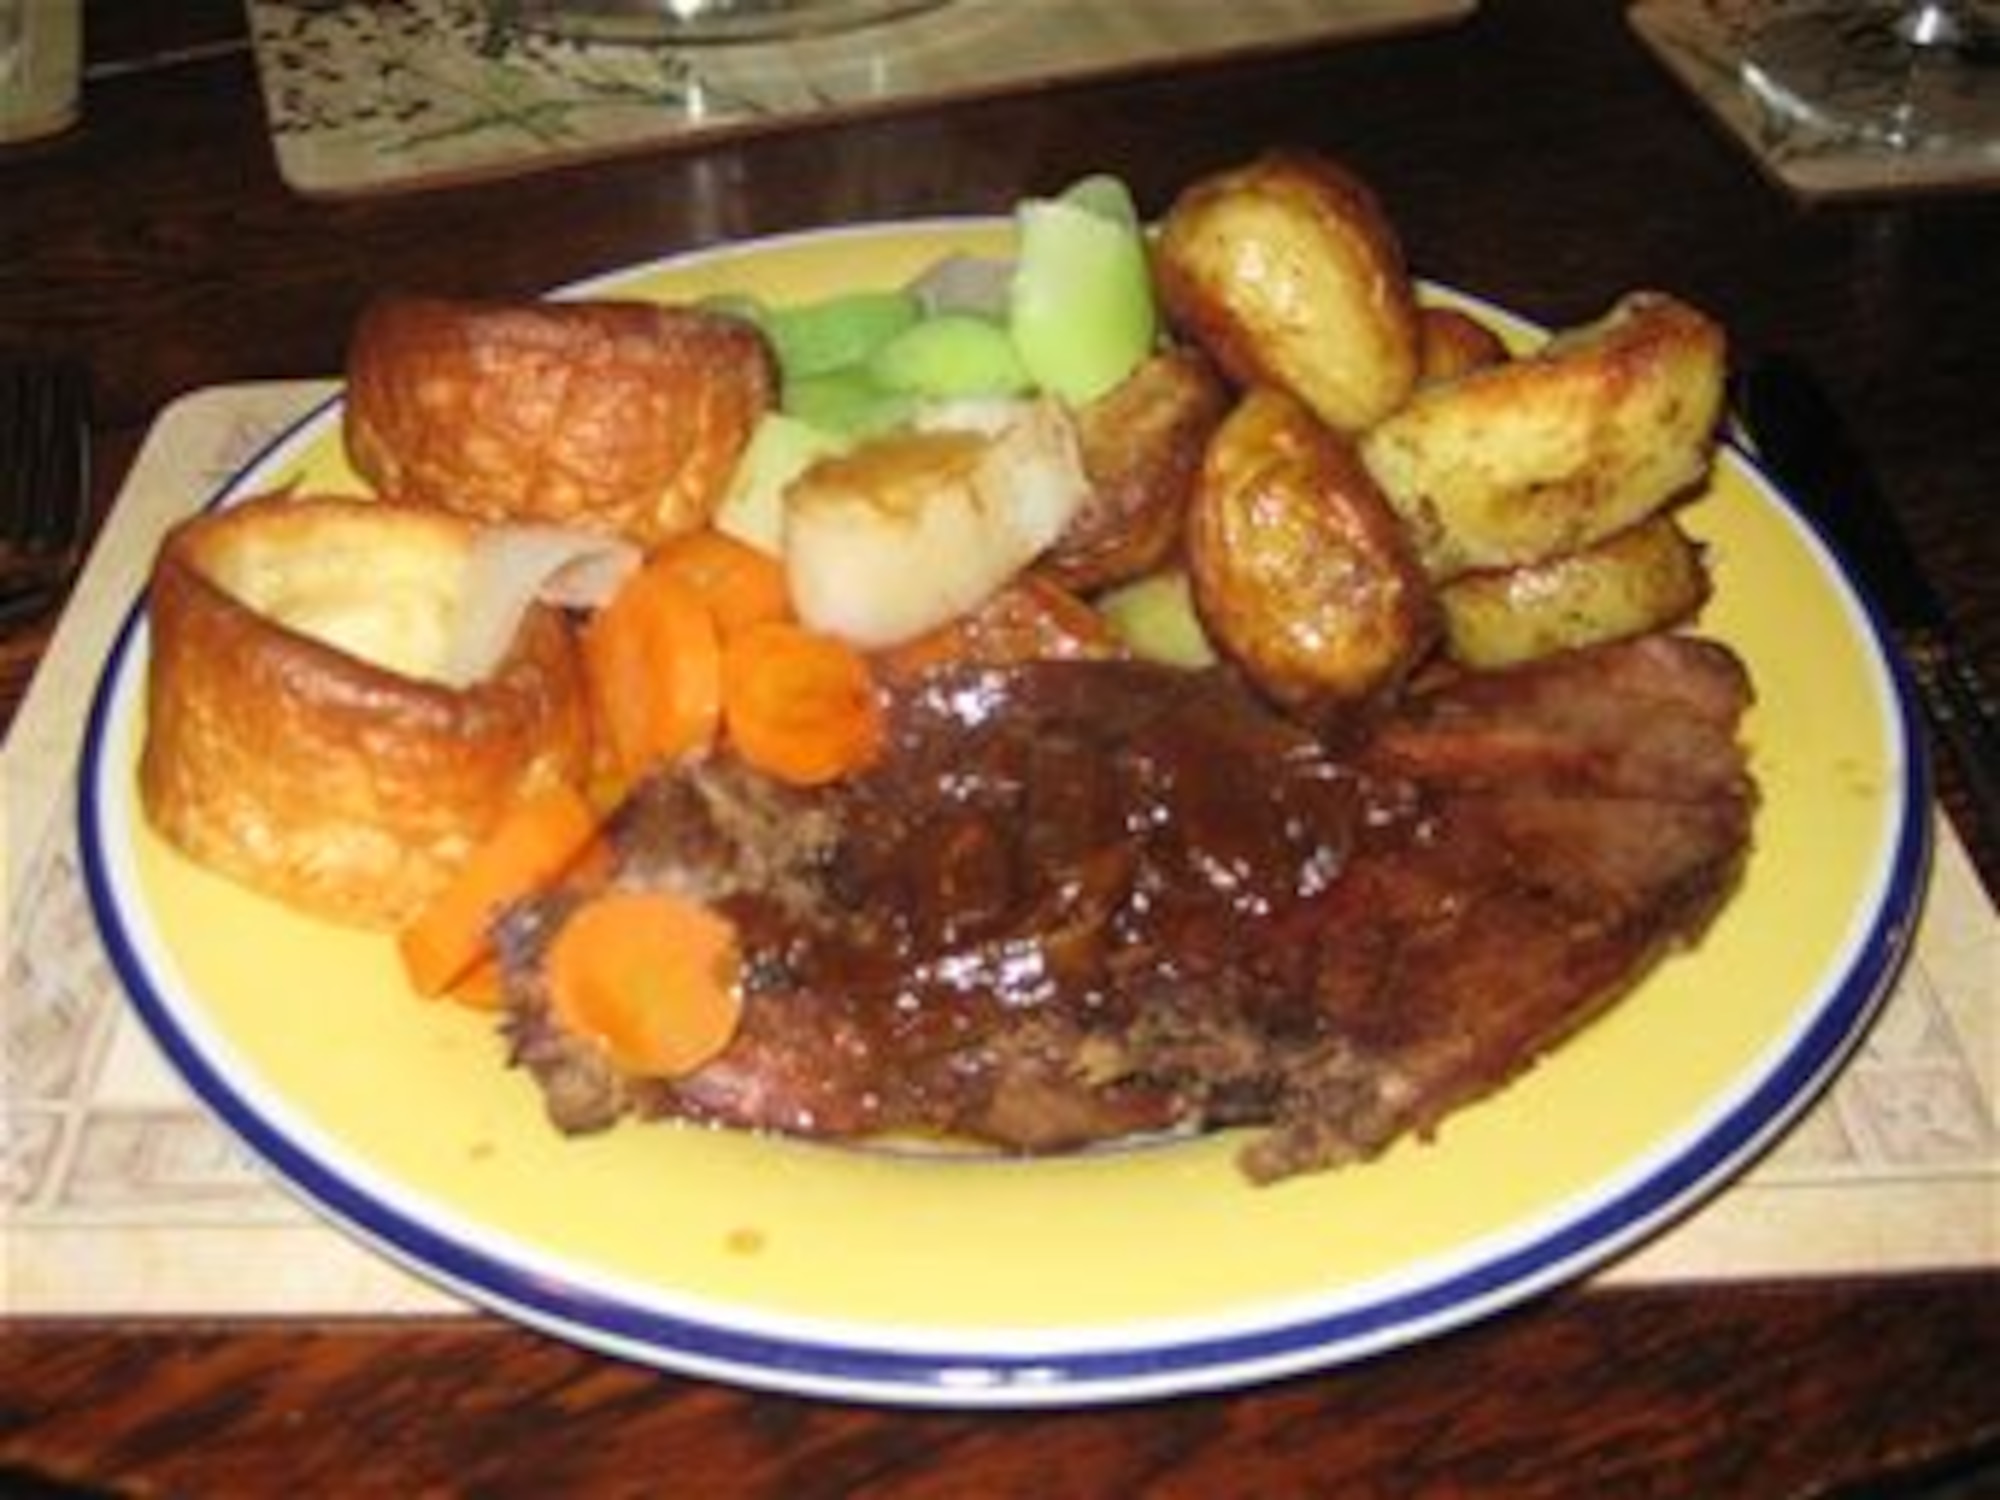 The Sunday roast dinner is still a tradition in many British families, when they all sit down together to eat a veritable feast of roasted meat served with roast potatoes, vegetables and all the trimmings.